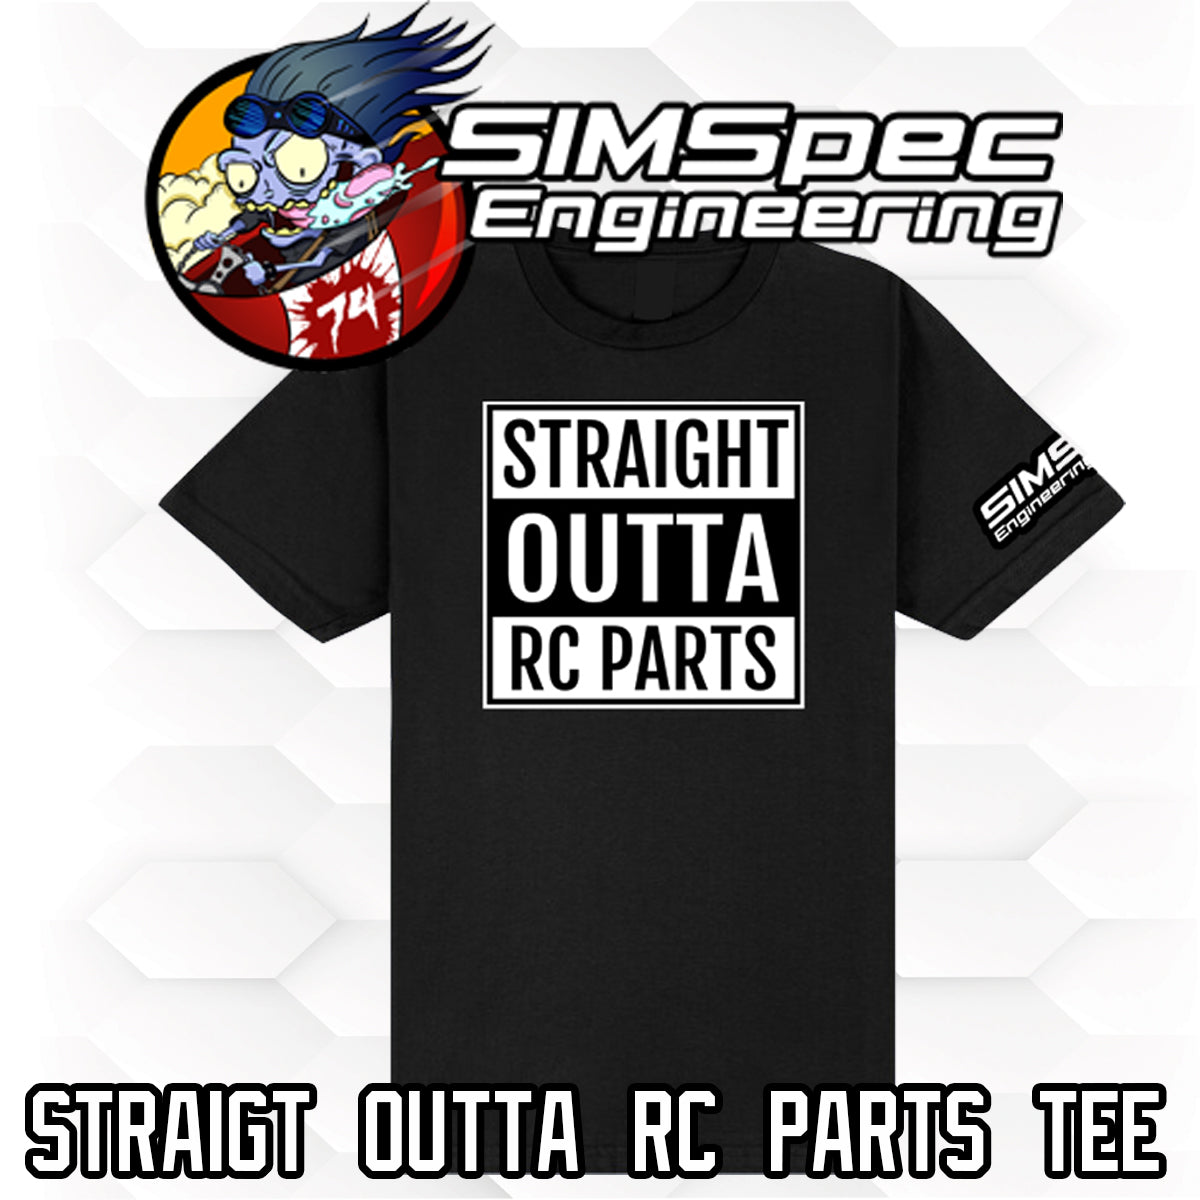 Straight Outta RC Parts T-Shirt